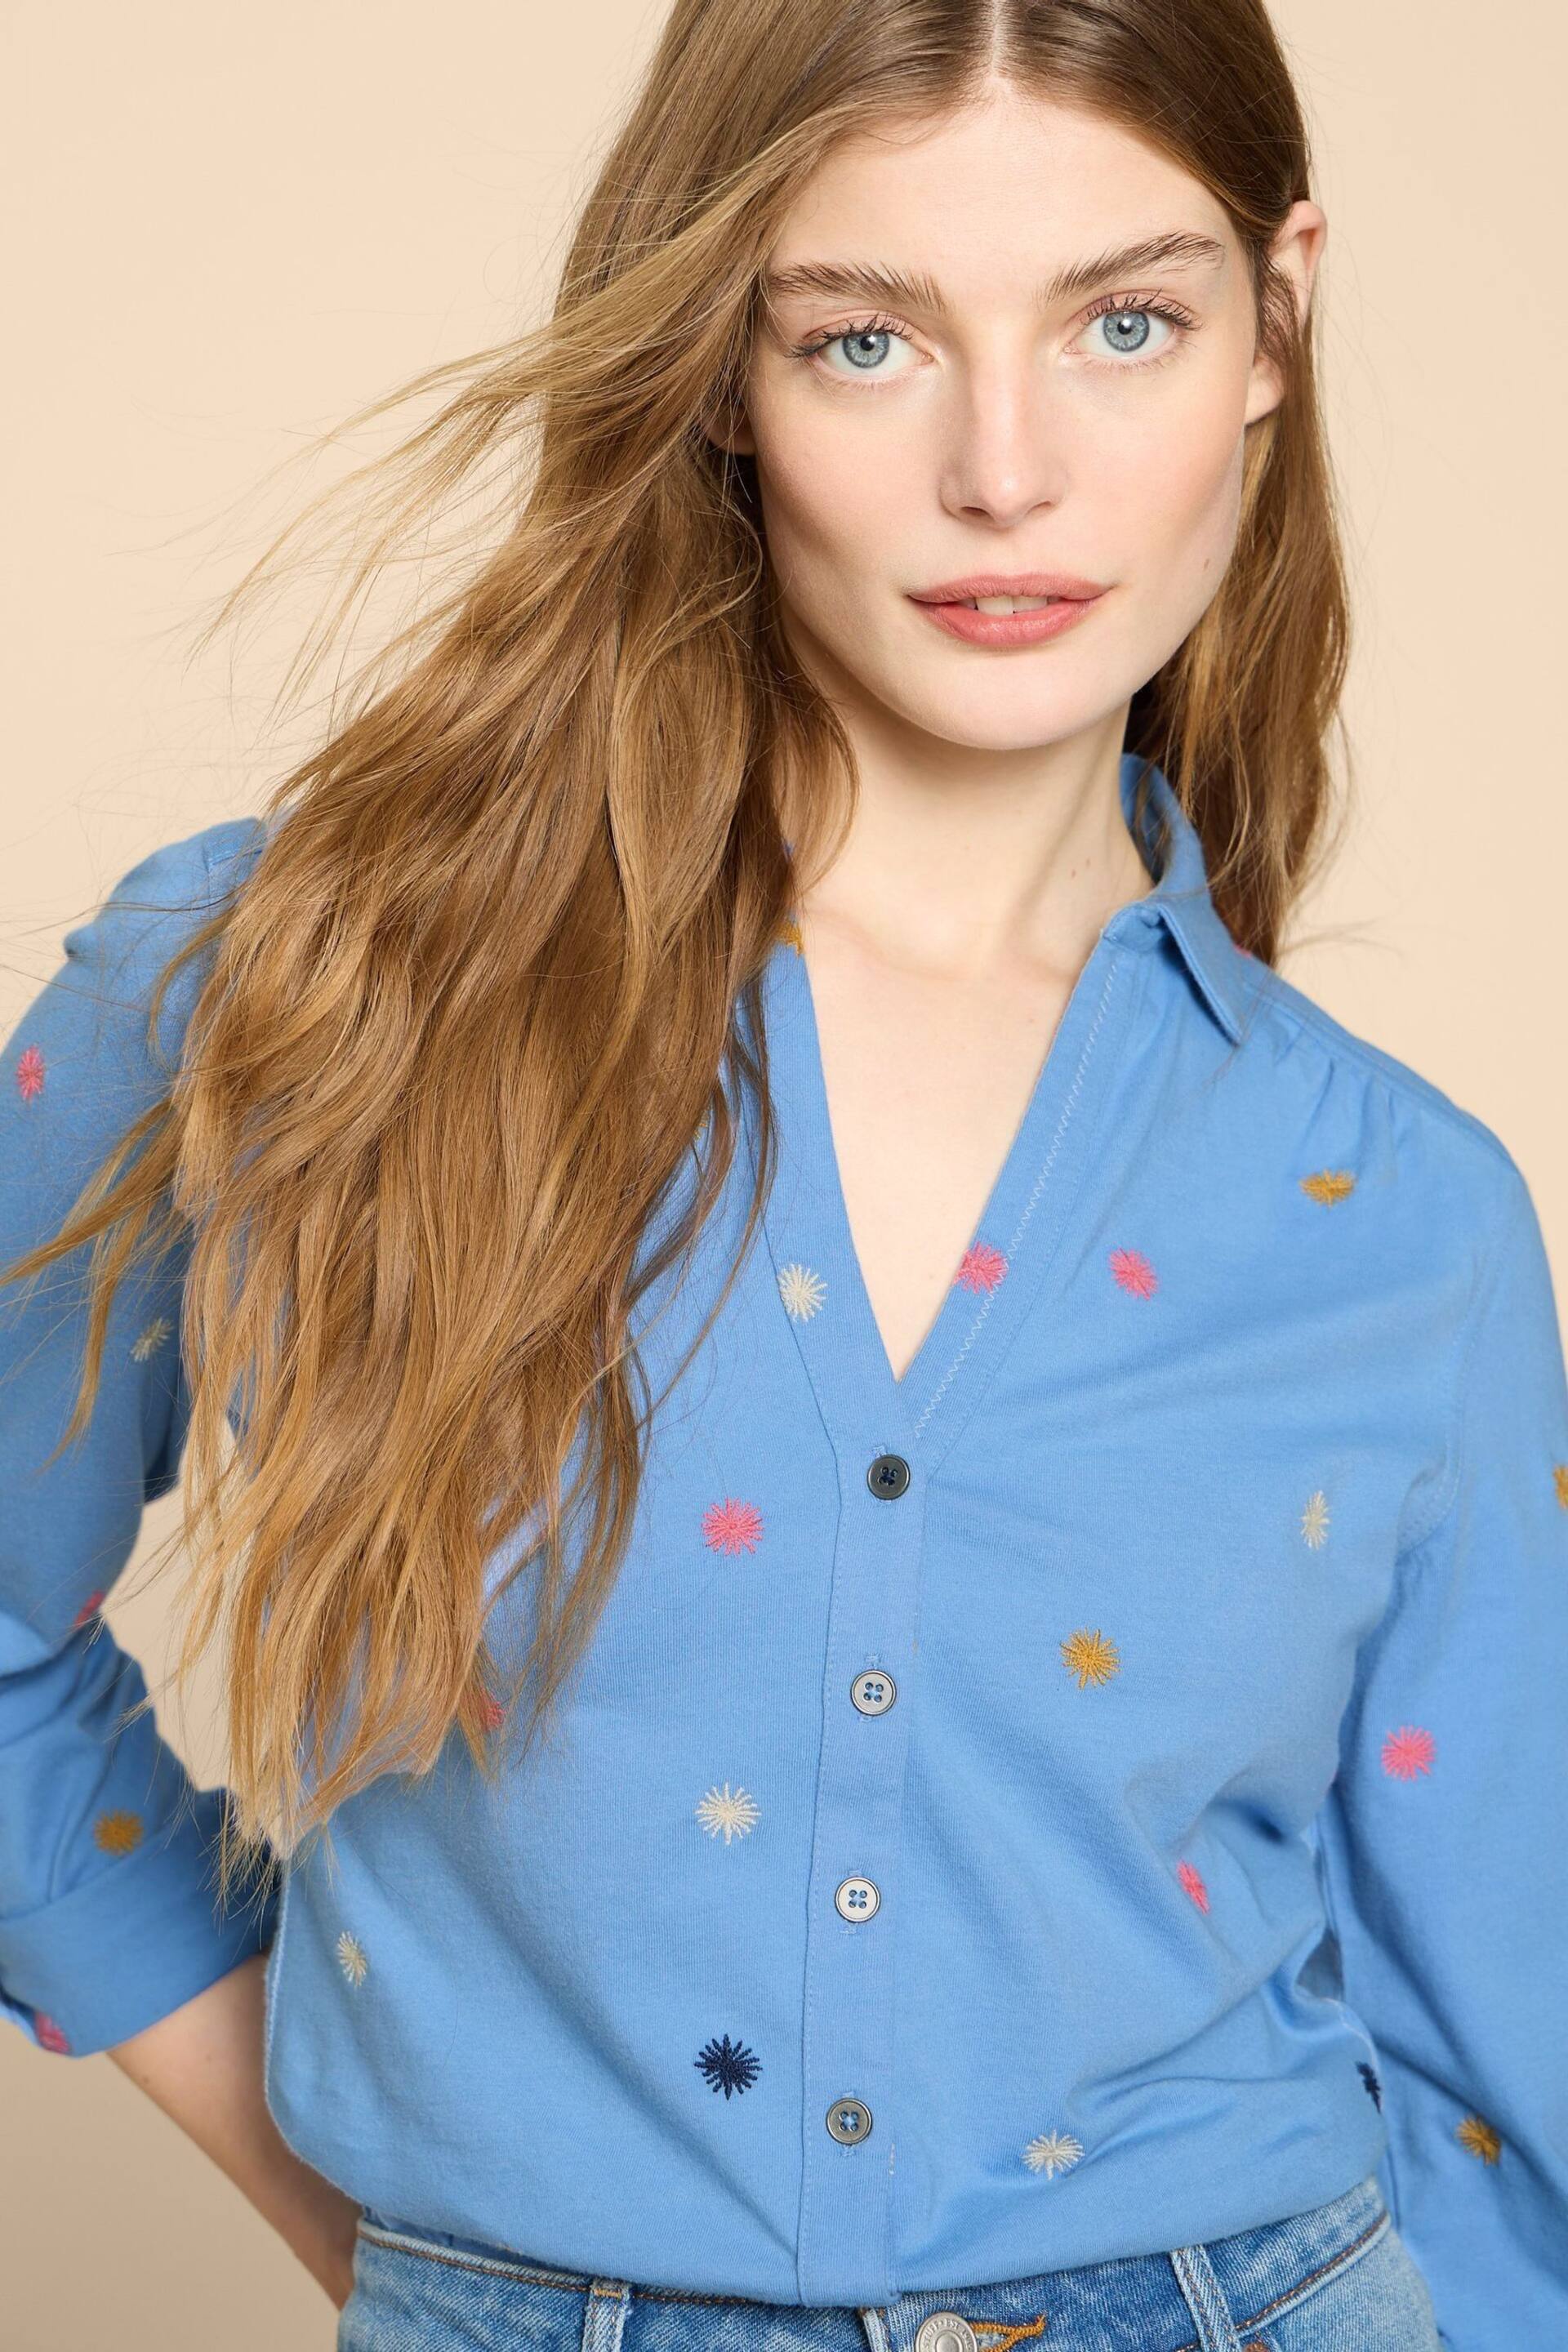 White Stuff Blue Annie Embroidered Jersey Shirt - Image 4 of 7